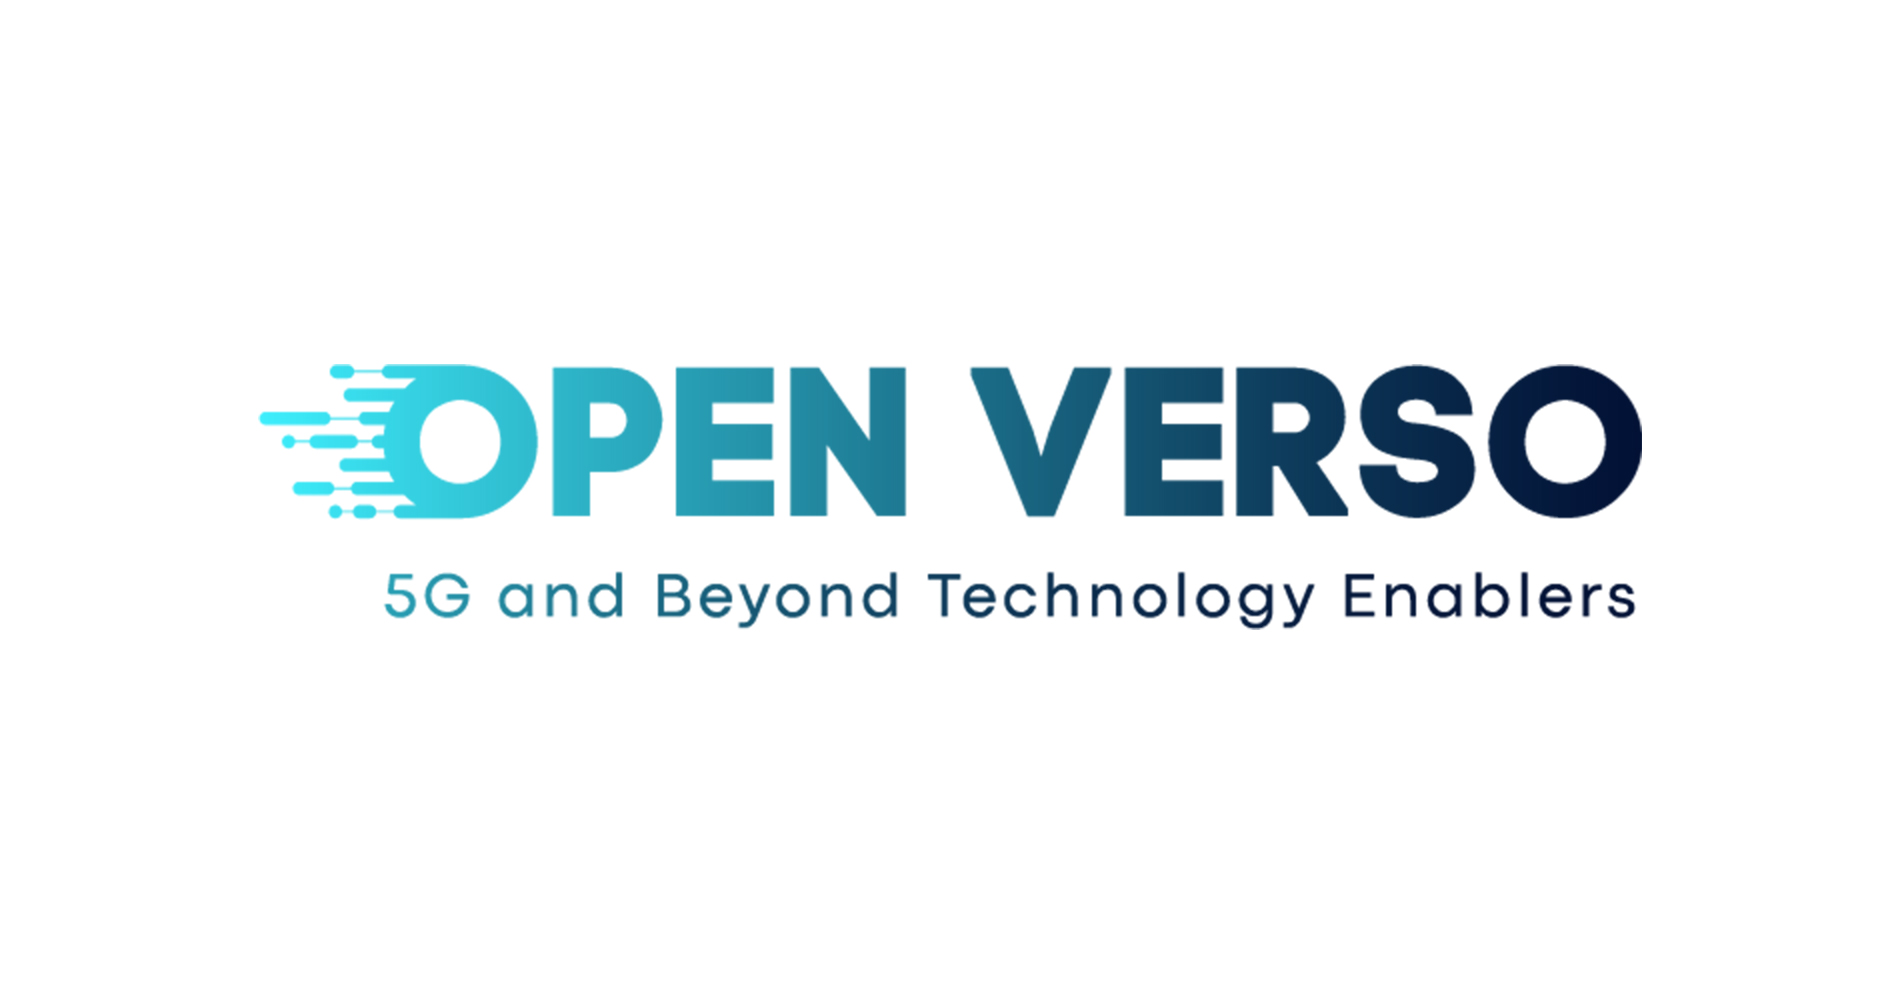 Open-VERSO is born, the Cervera Network of Excellence led by Vicomtech to accelerate the evolution of next generation 5G and beyond mobile communication networks